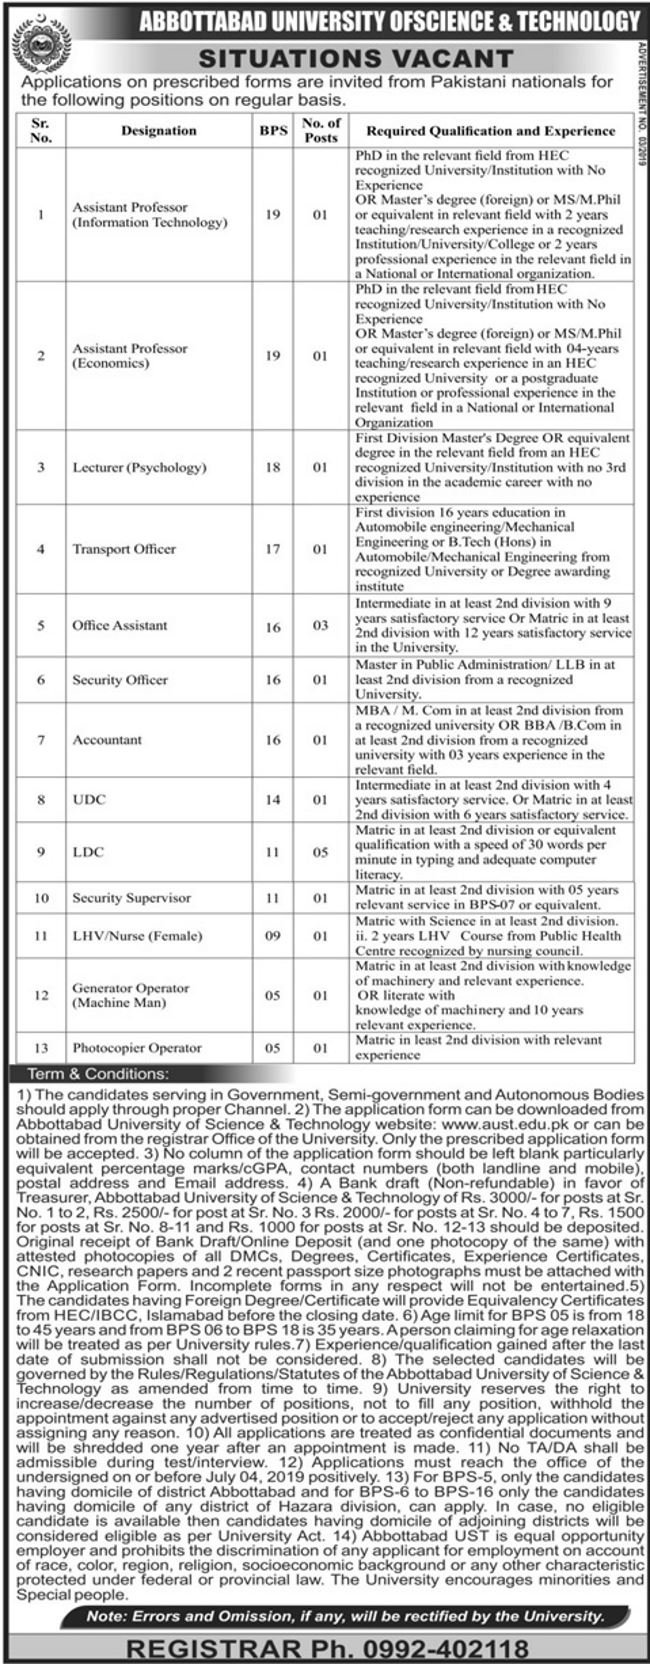 Abbottabad University of Science & Technology Jobs 2019 for 20+ Clerks, Accounts, Teaching Staff & Other